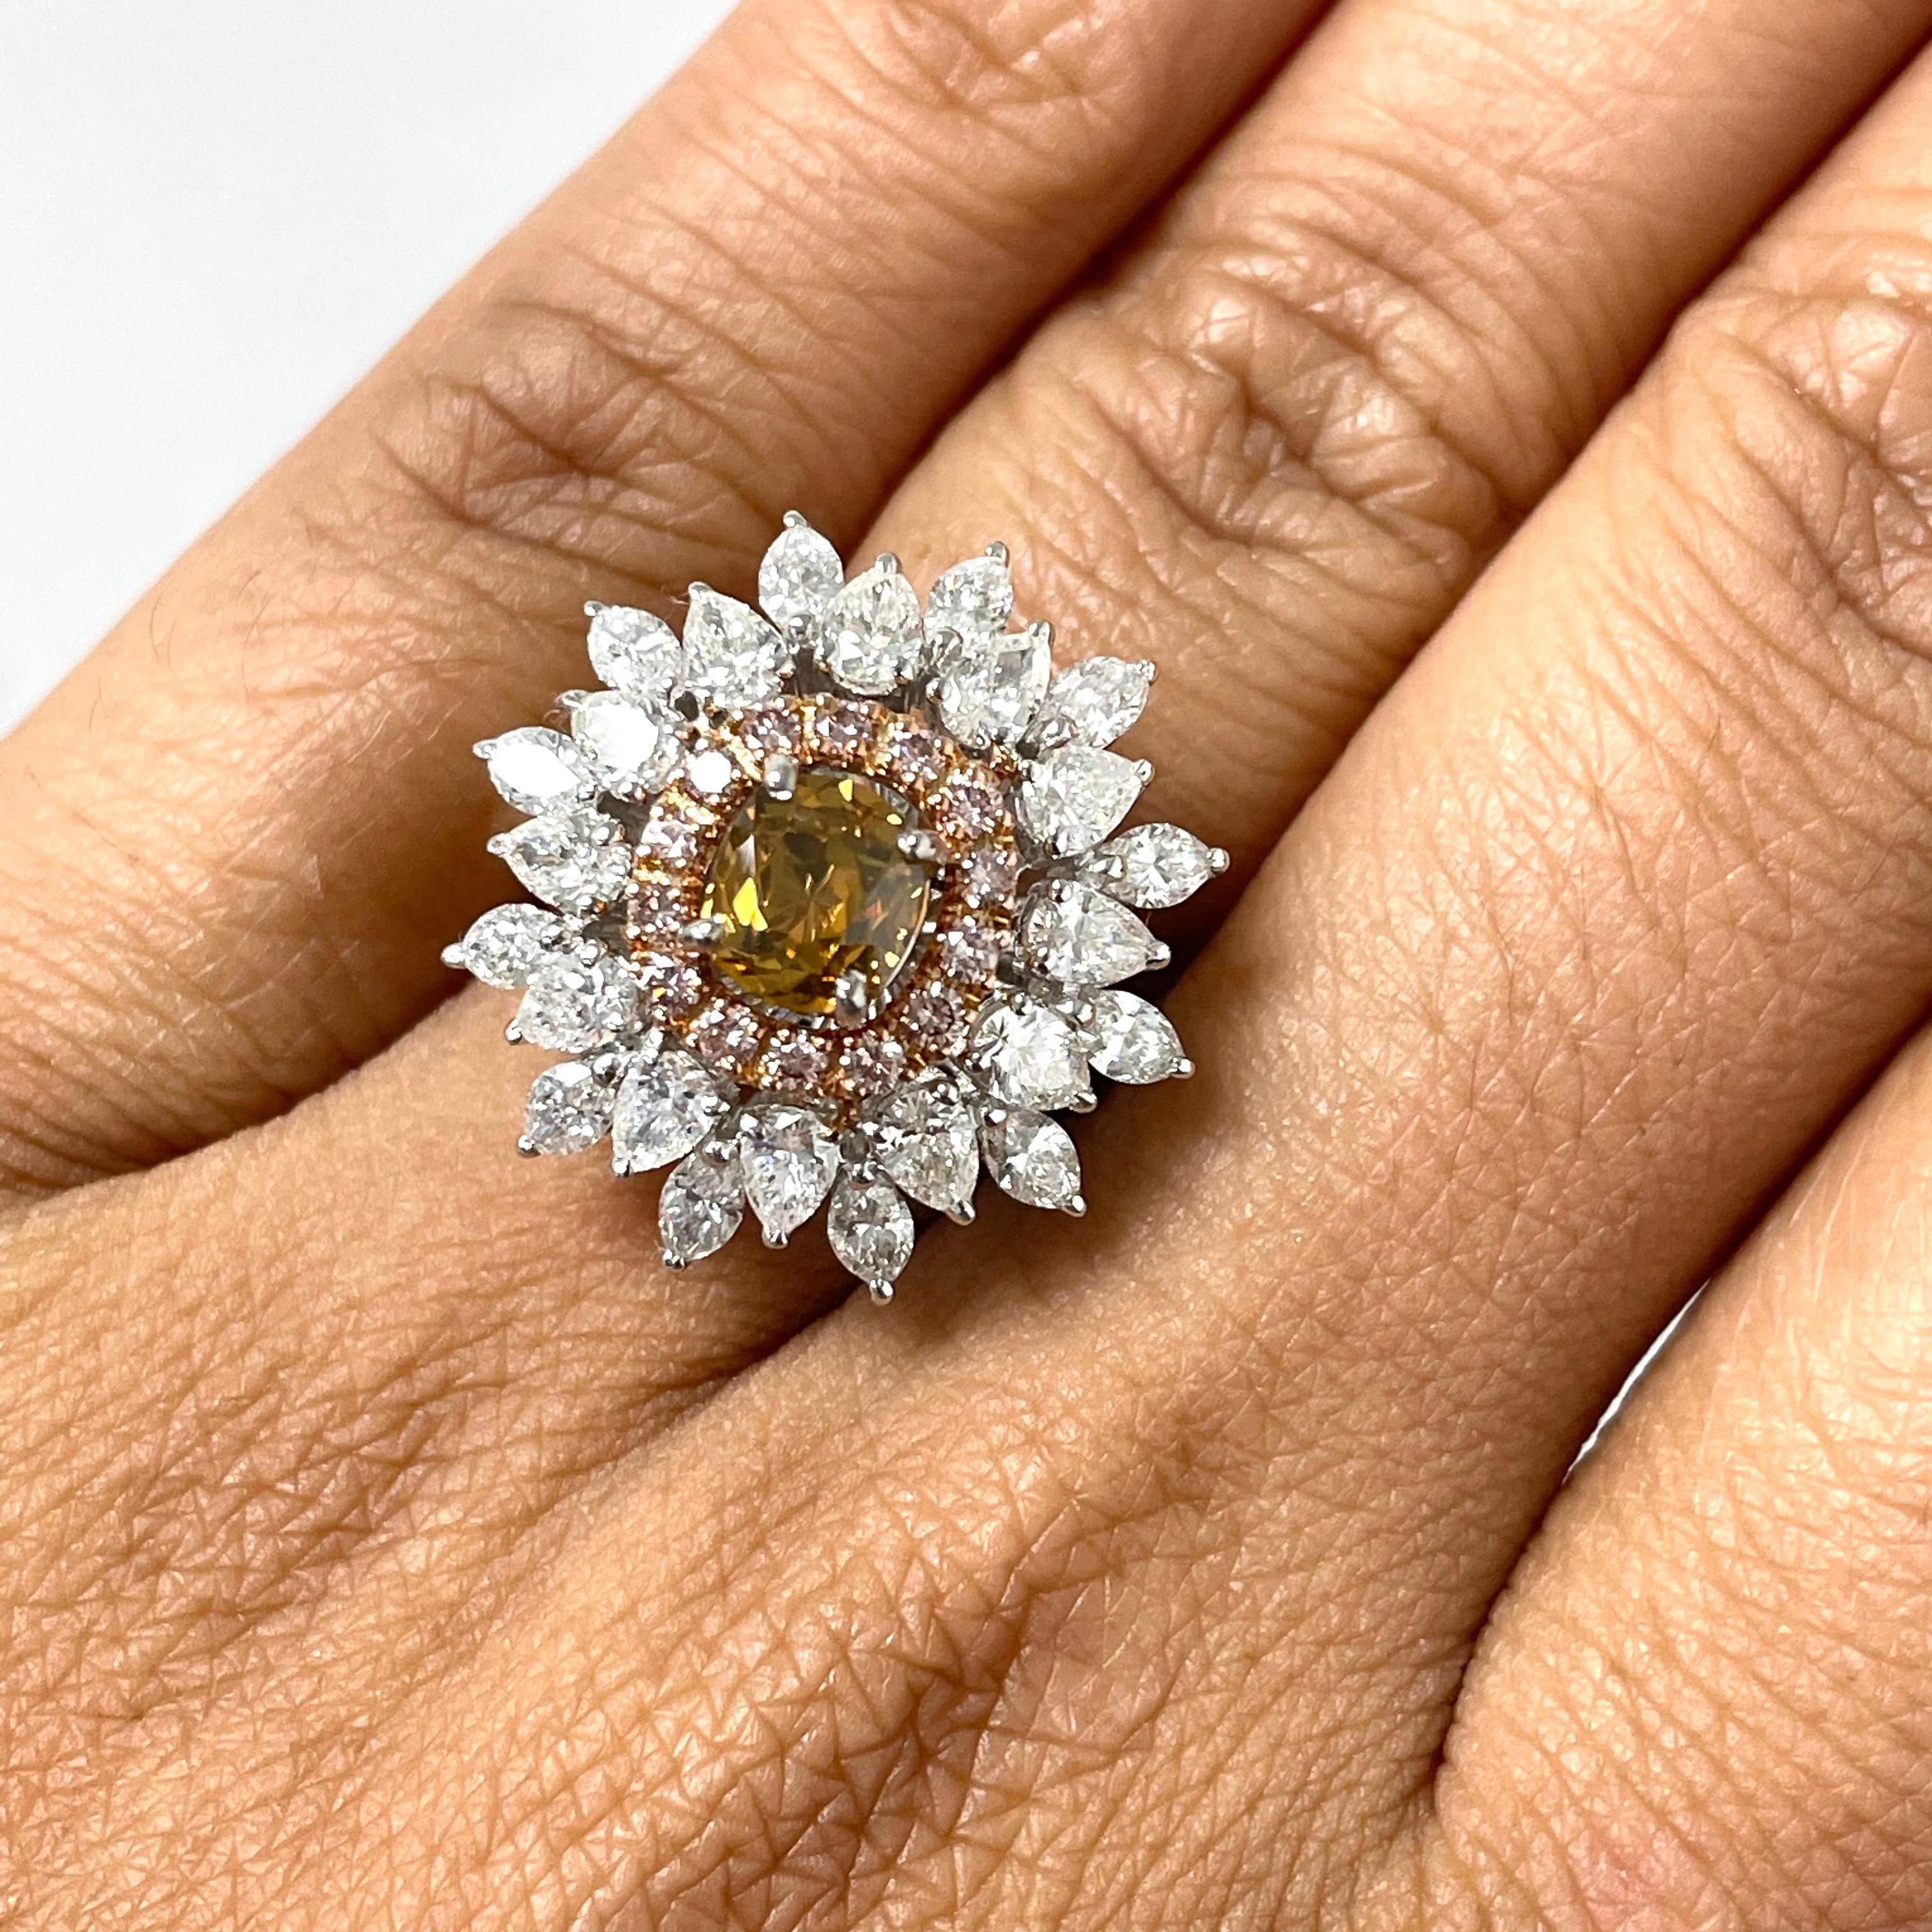 The Blossoms Diamond Cocktail Ring is uniquely floral and dazzling. With a orangey brown diamond center and a pink diamond halo, all surrounded with marquise and pear shape diamond radiating outwards, the ring is a mesmerizing jewel.

Center Diamond